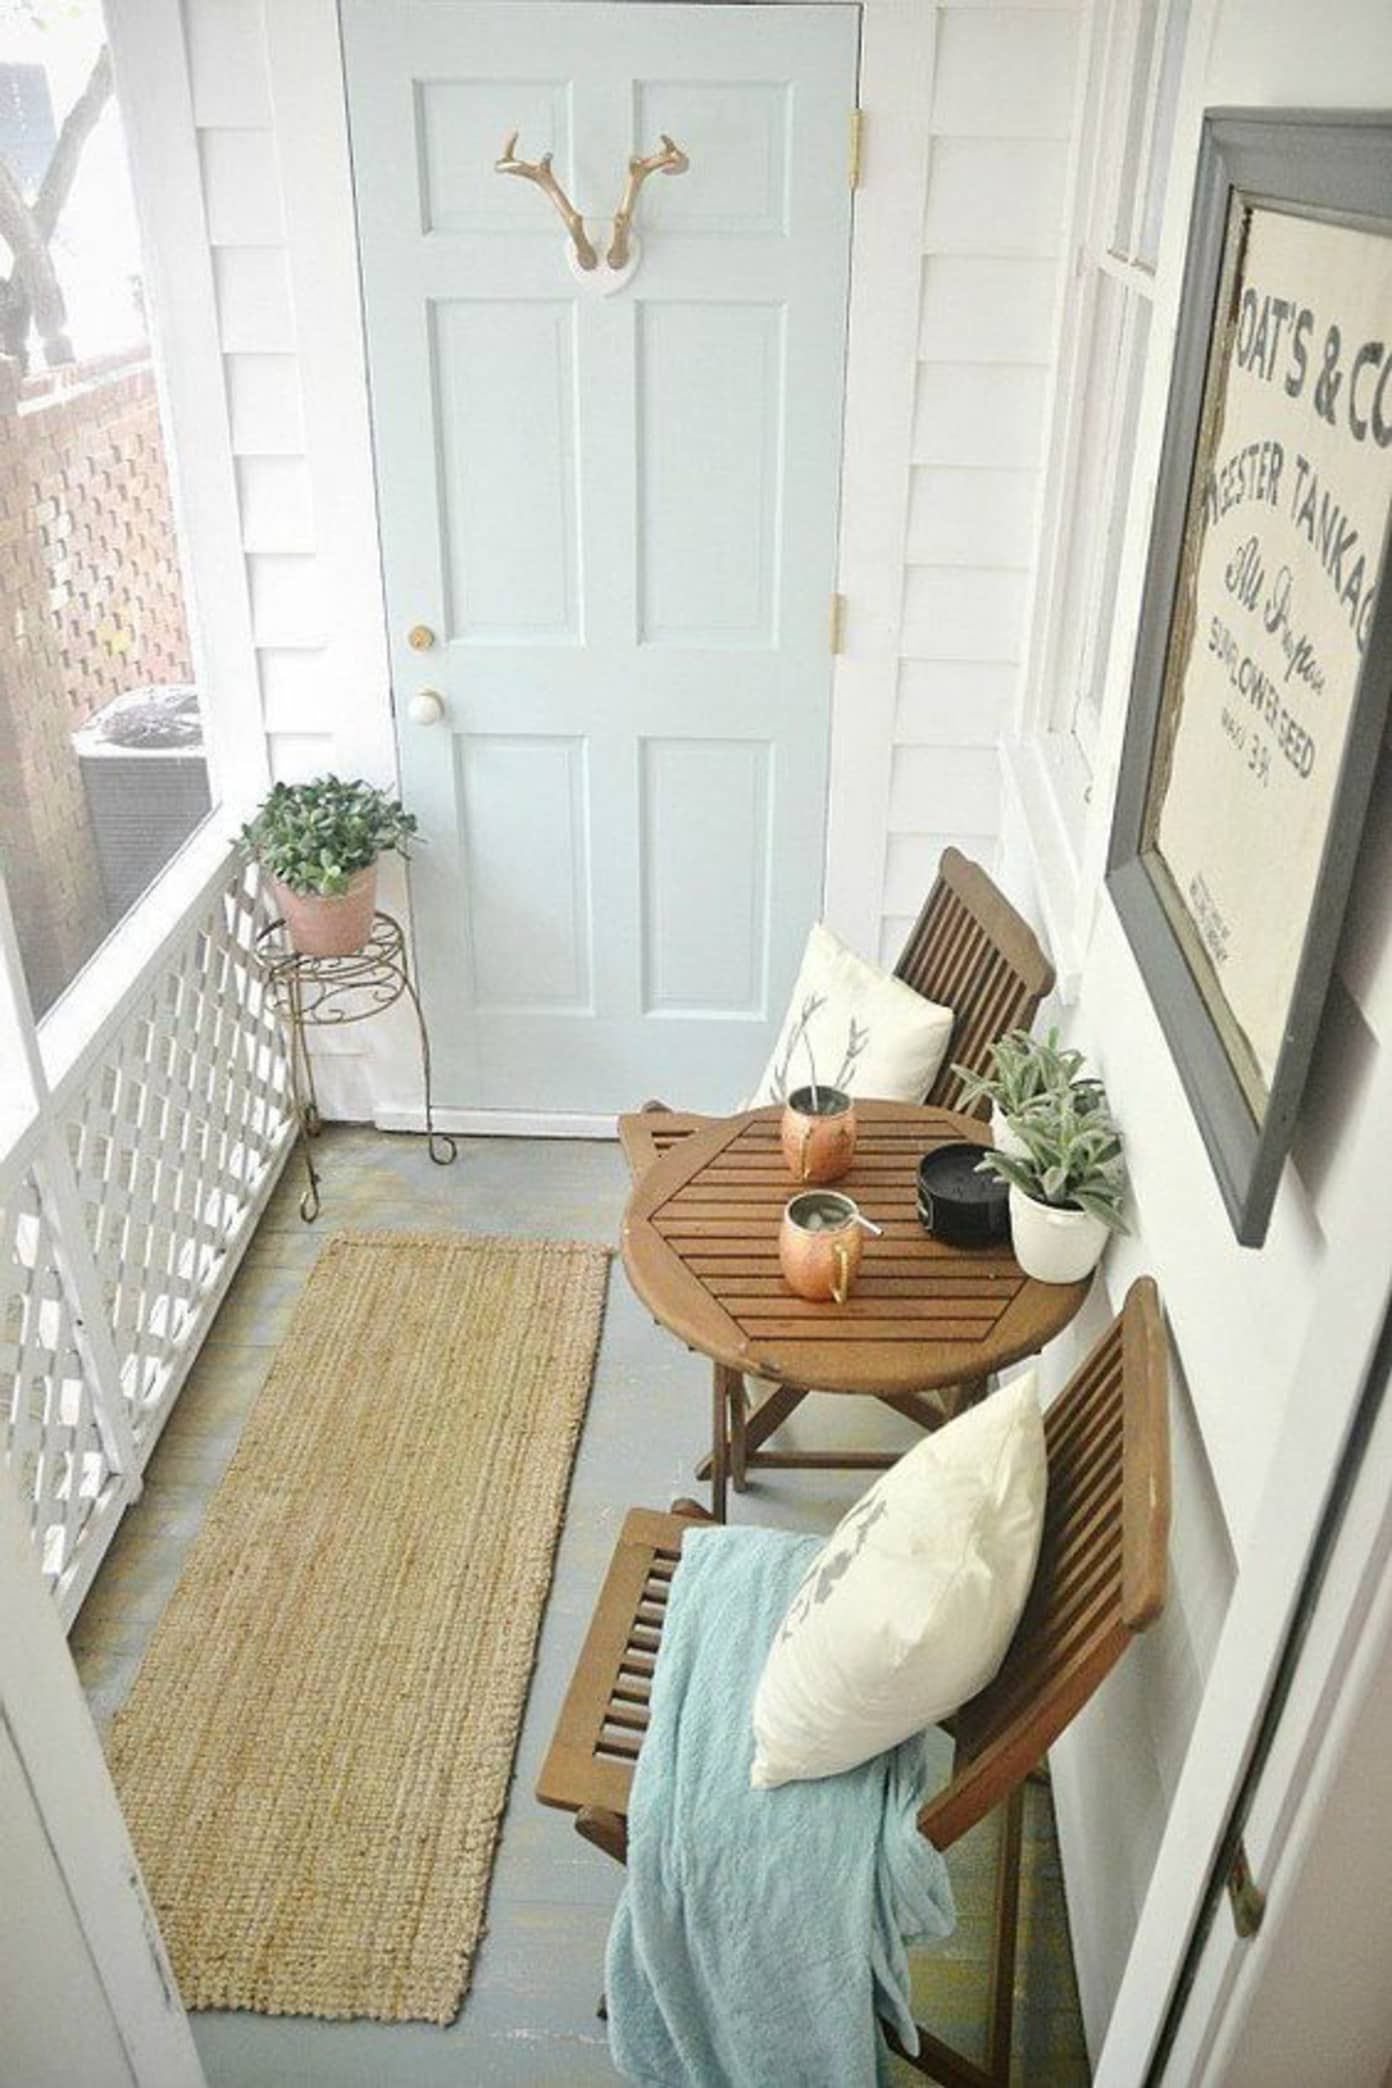 Creative Small Porch Design Ideas to
Elevate Your Outdoor Space